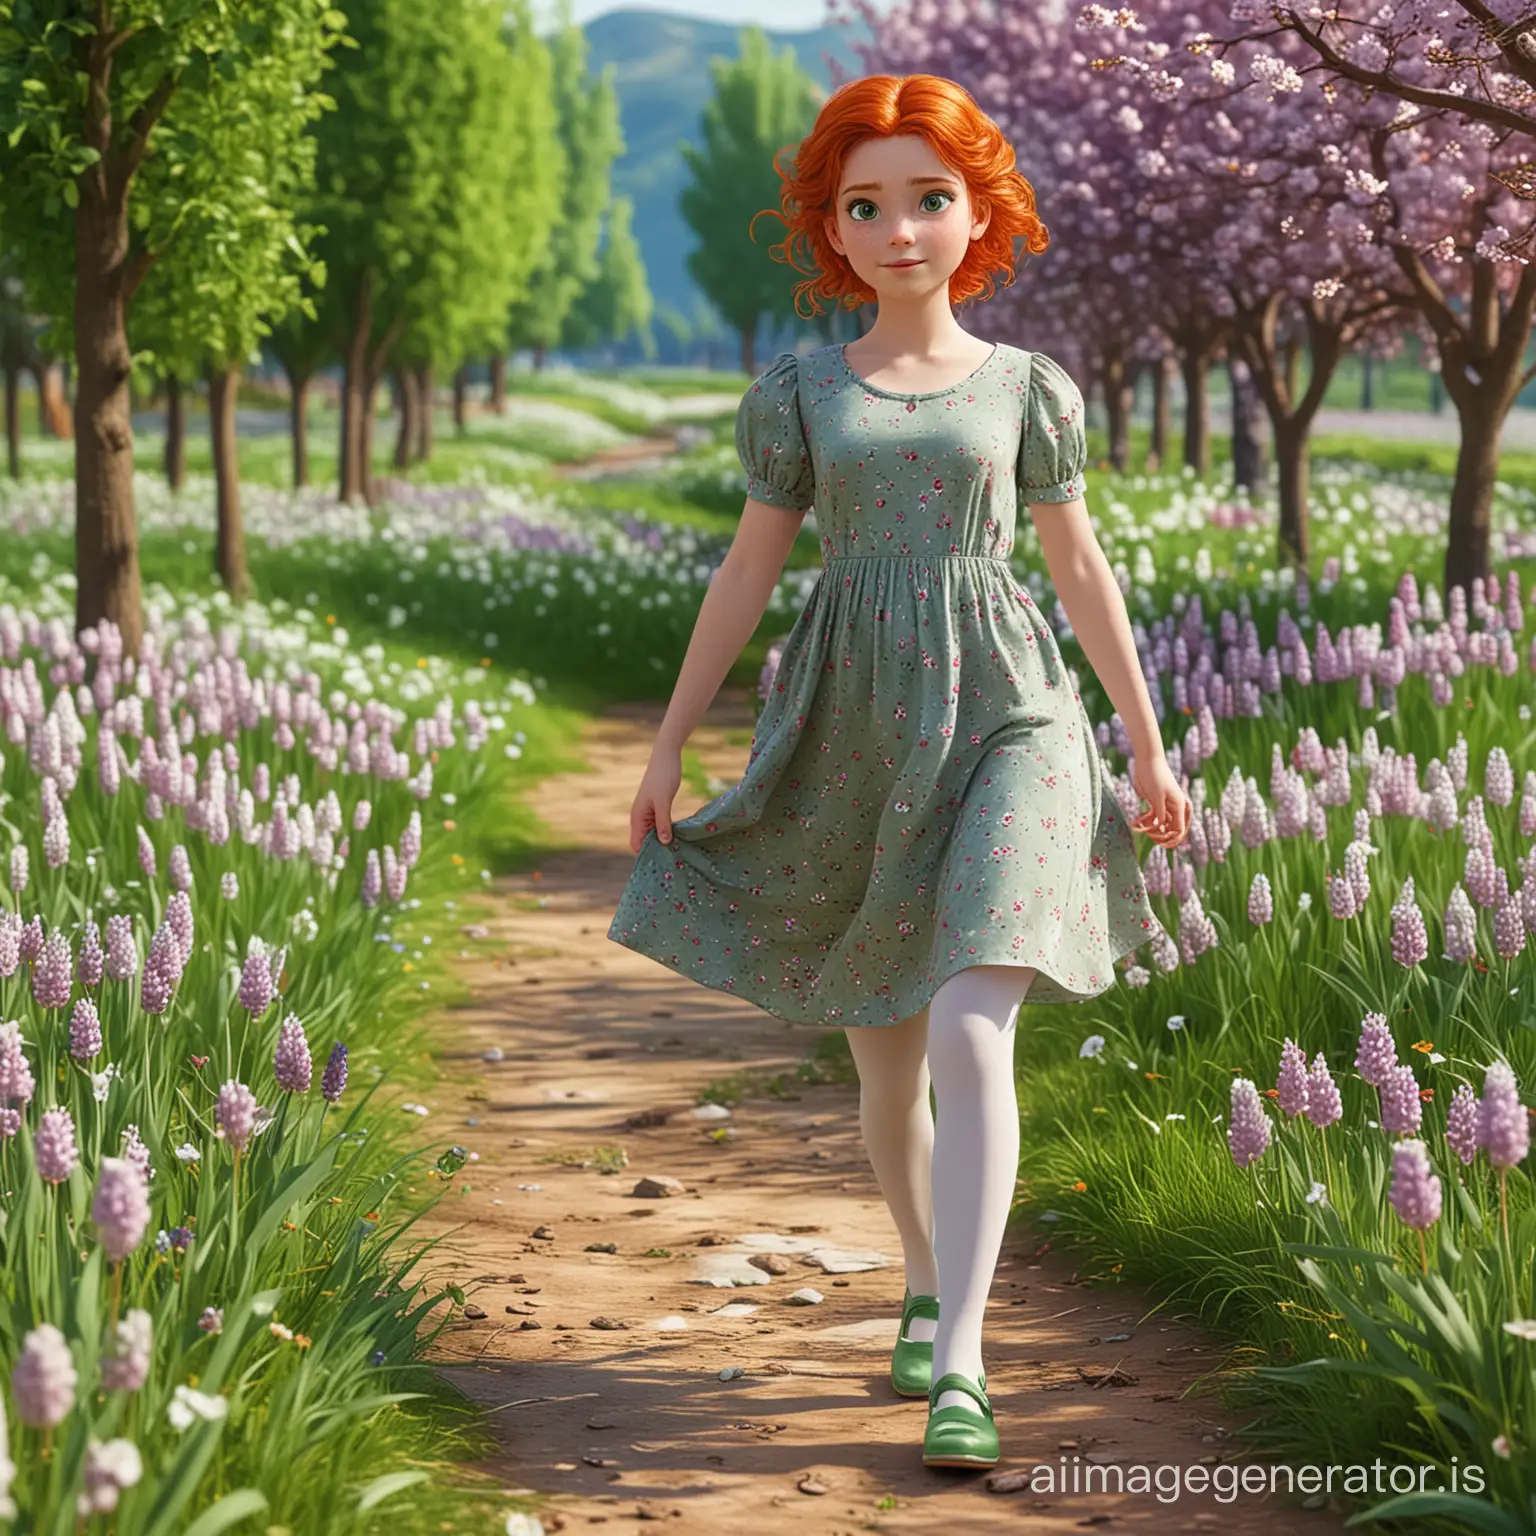 Enchanting-Spring-Landscape-with-RedHaired-Girl-in-Green-Dress